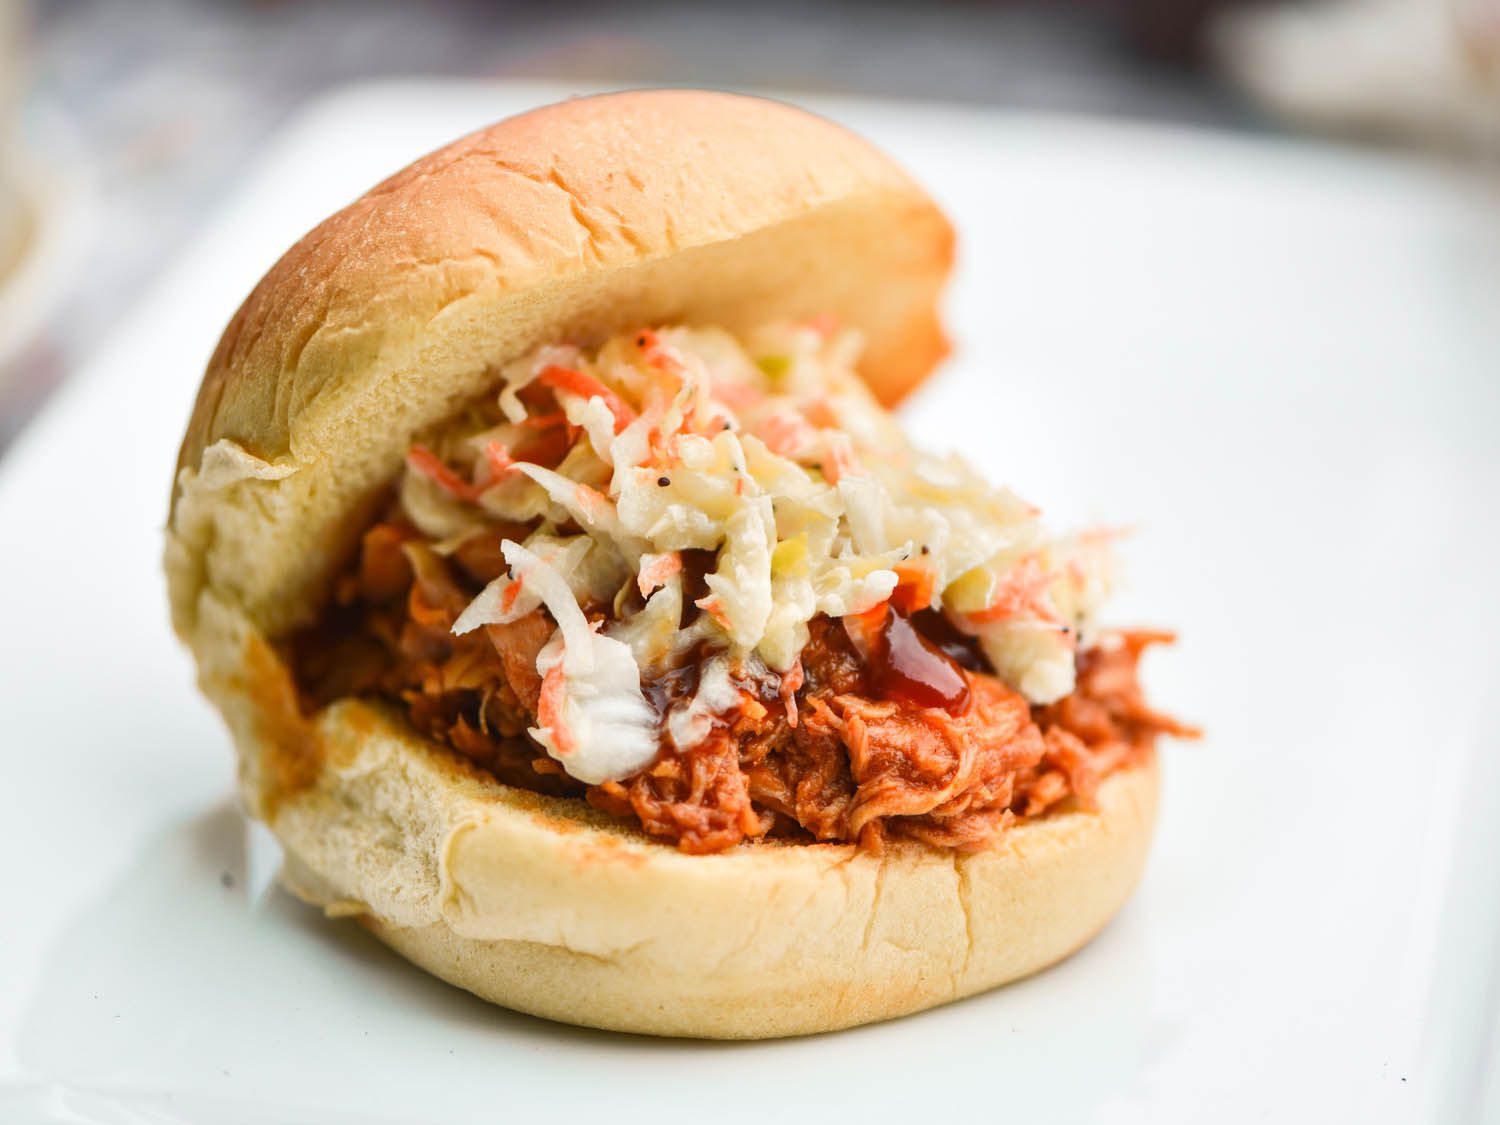 A sandwich bun filled with barbecue pulled chicken and coleslaw